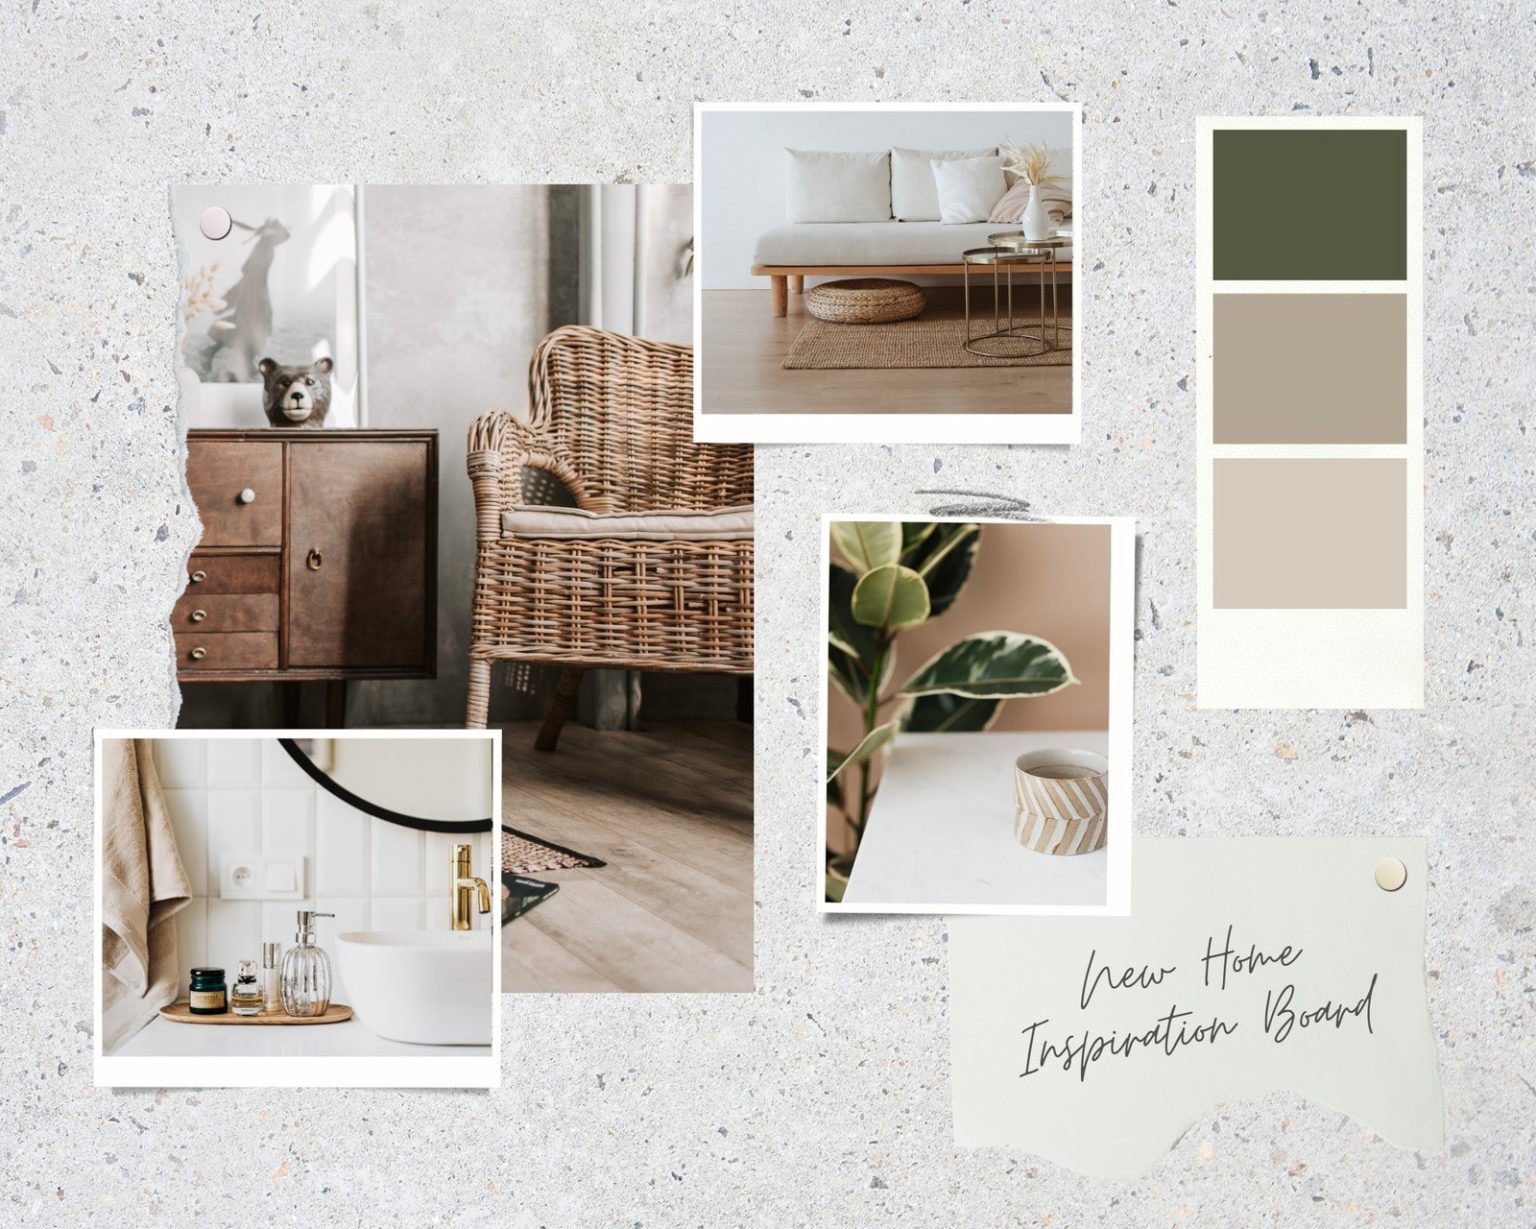 Mood boards are the first phase in the idea feel or project style